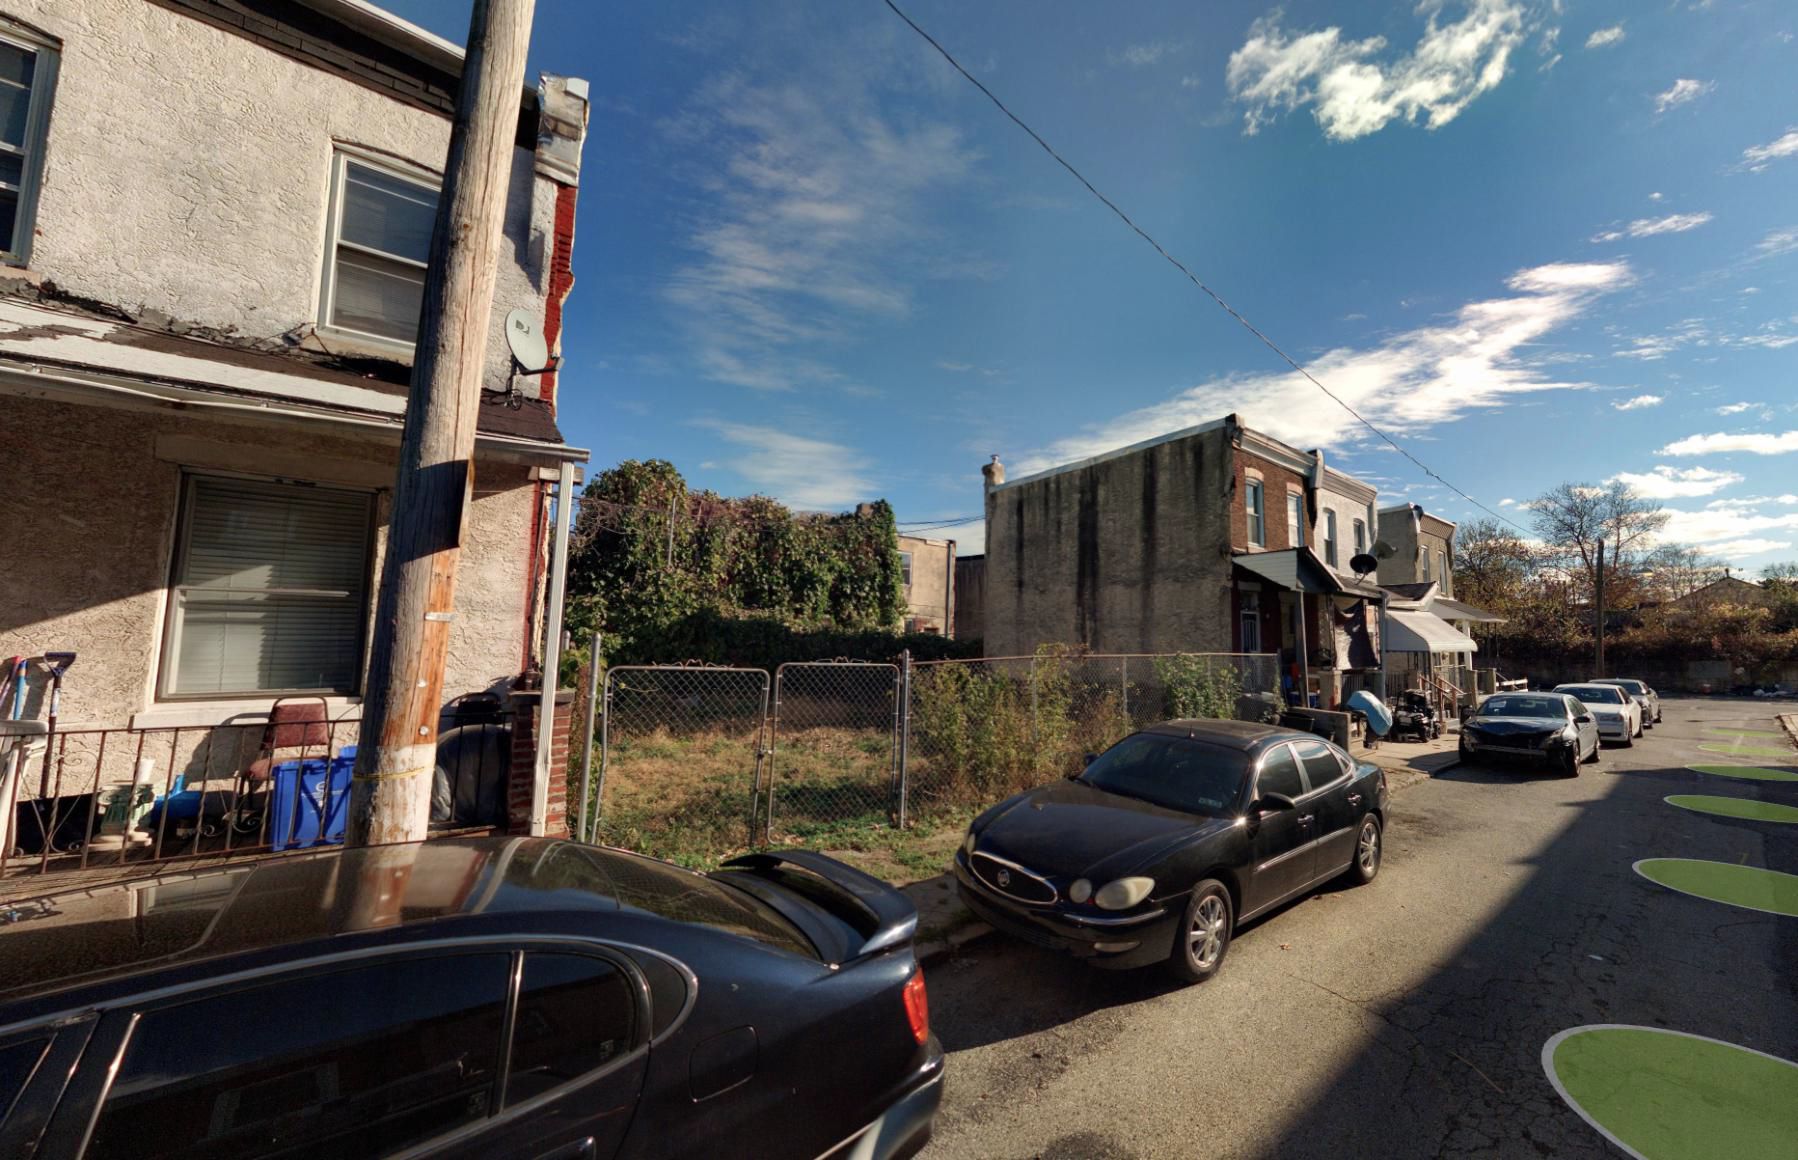 653 North Sickels Street. Site conditions prior to redevelopment. Looking southeast. Credit: Moto Designshop via the City of Philadelphia